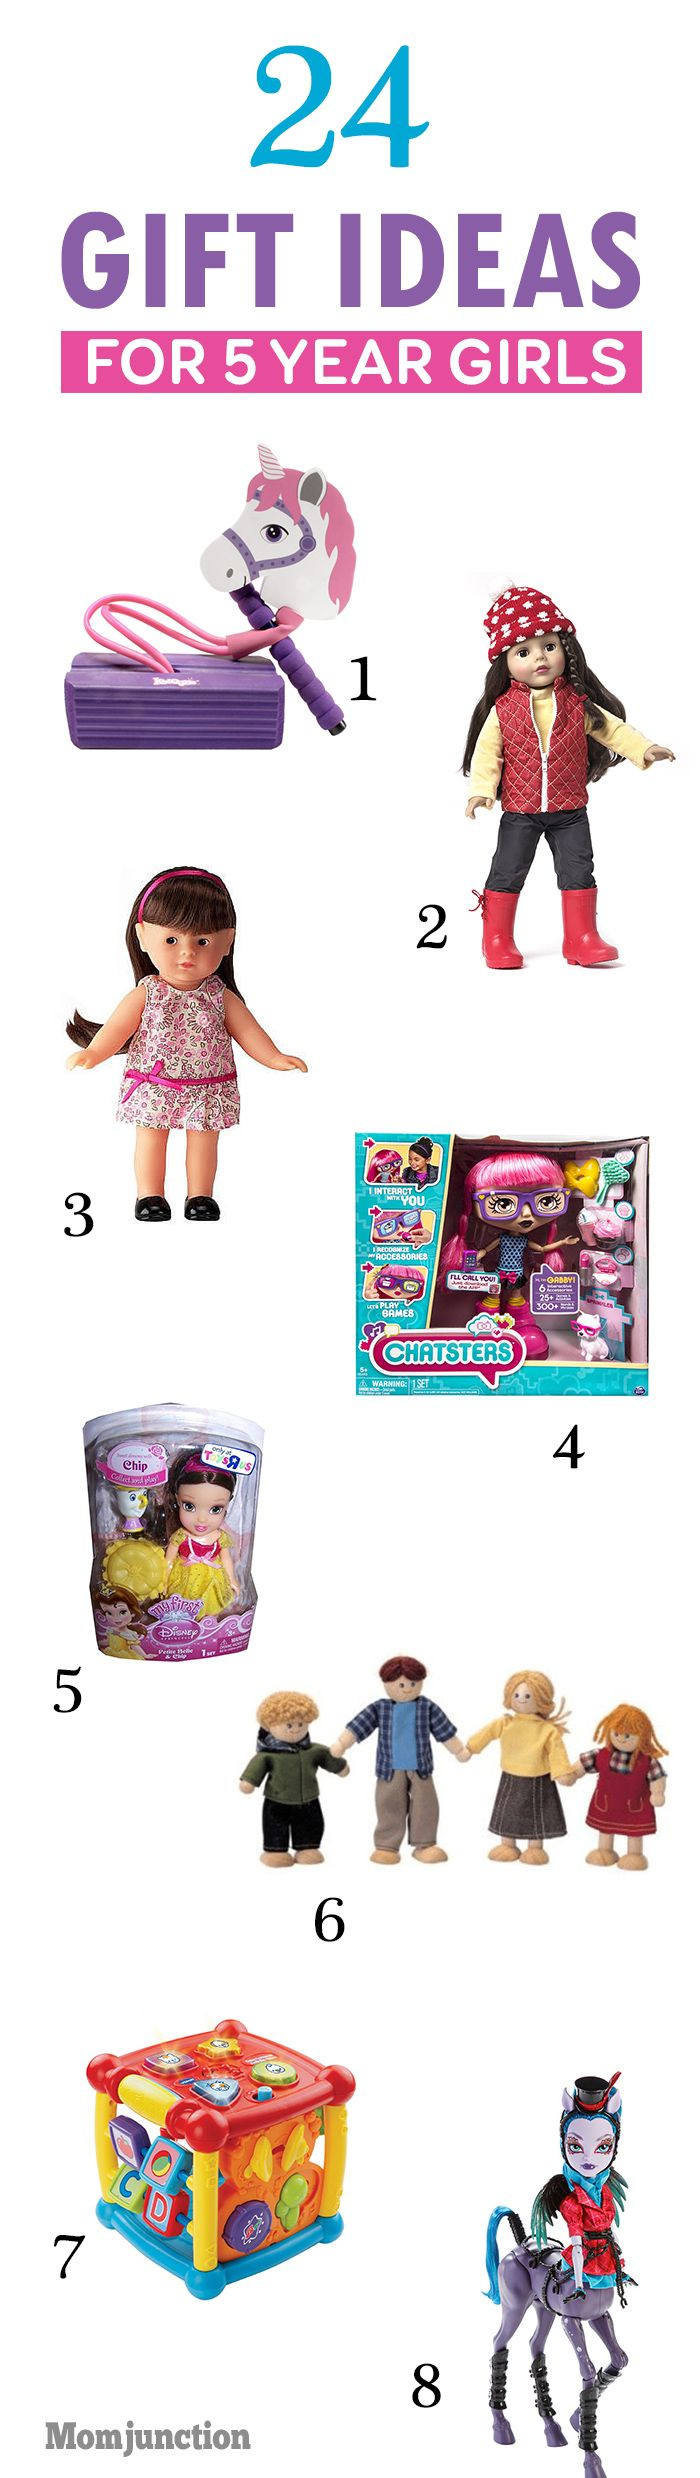 5 Yr Old Girl Christmas Gift Ideas
 31 Best Gifts For 5 Year Old Girls To Buy In 2020